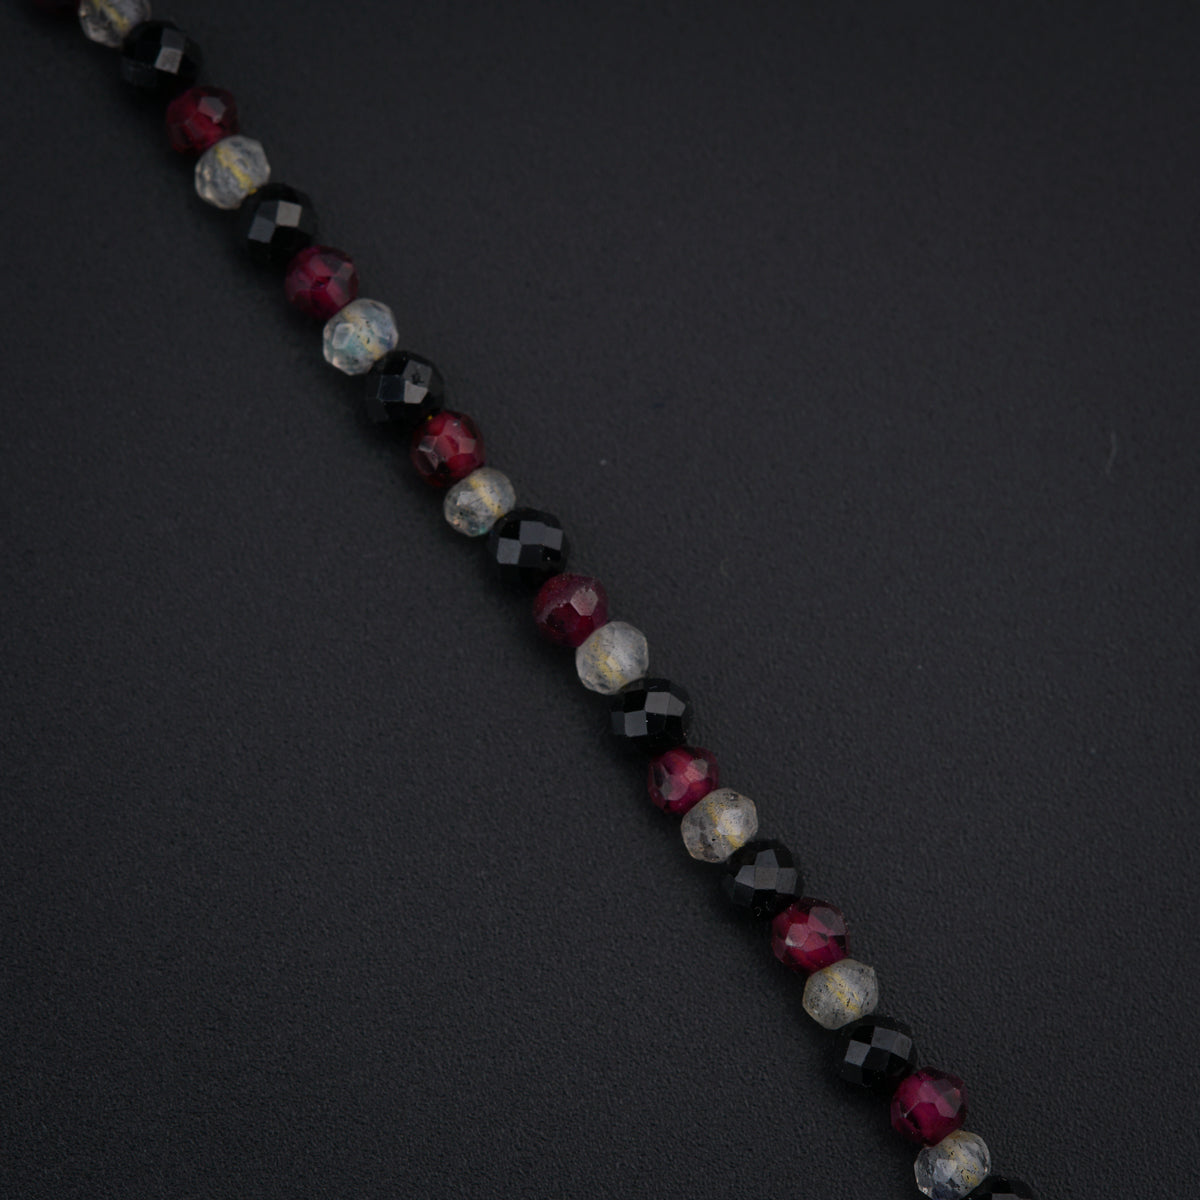 a close up of a beaded necklace on a black surface